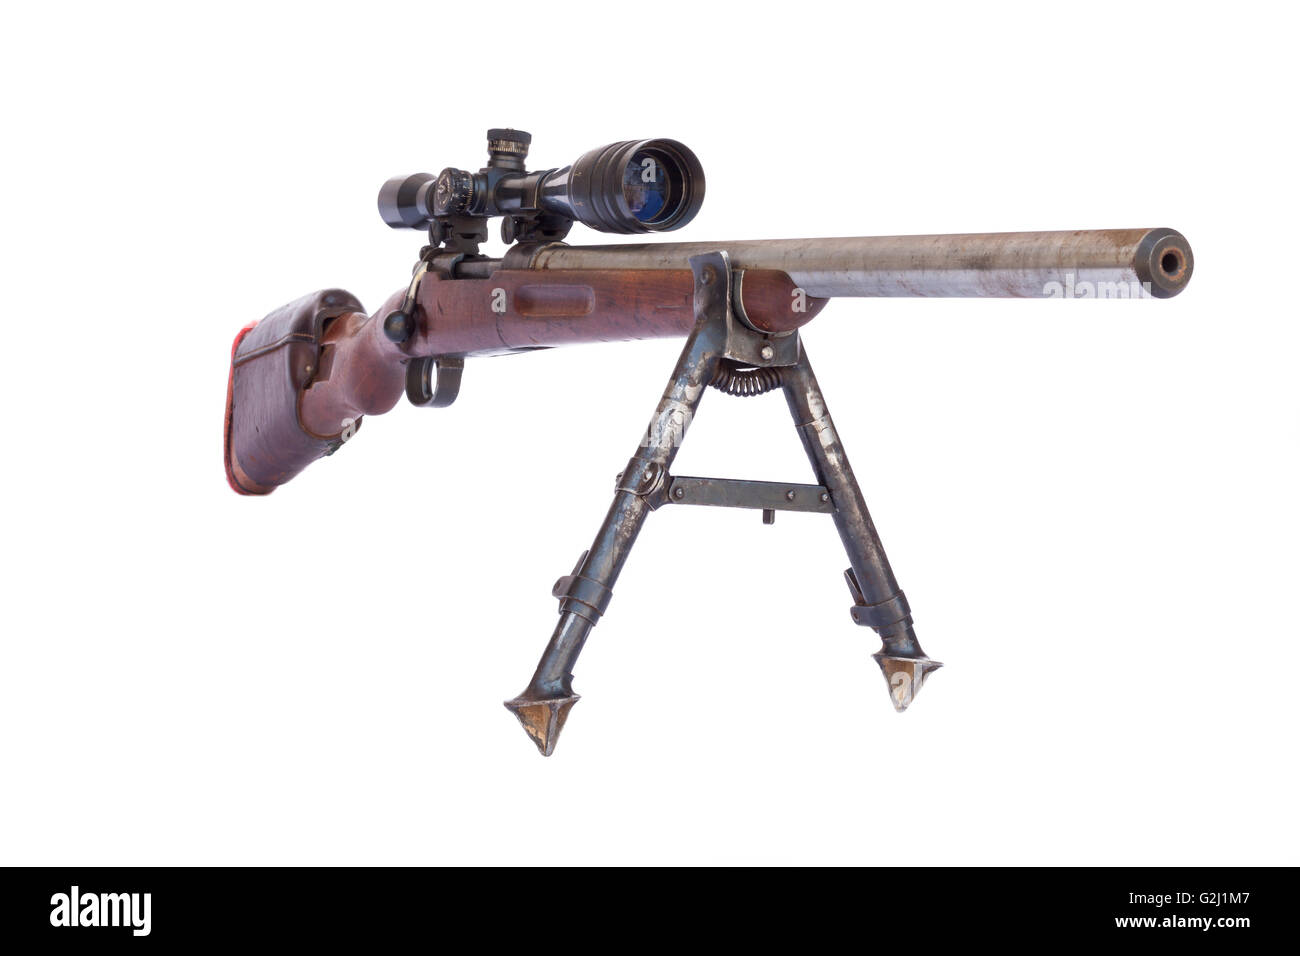 Old rusty sniper rifle with scope isolated on white background Stock Photo